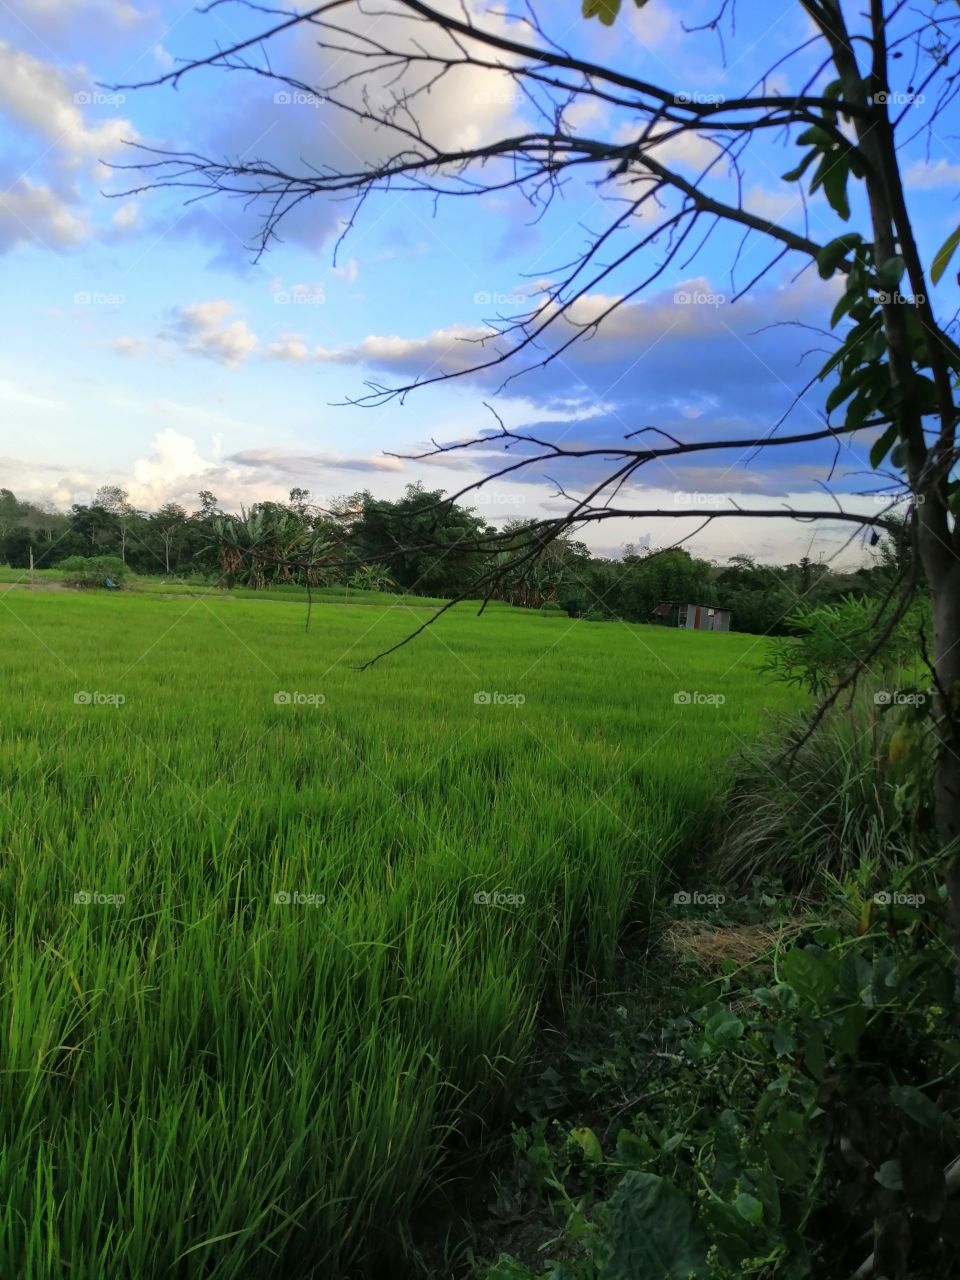 Paddy field or sawah or called  tabasan In my place. Called Dumoh ni my native